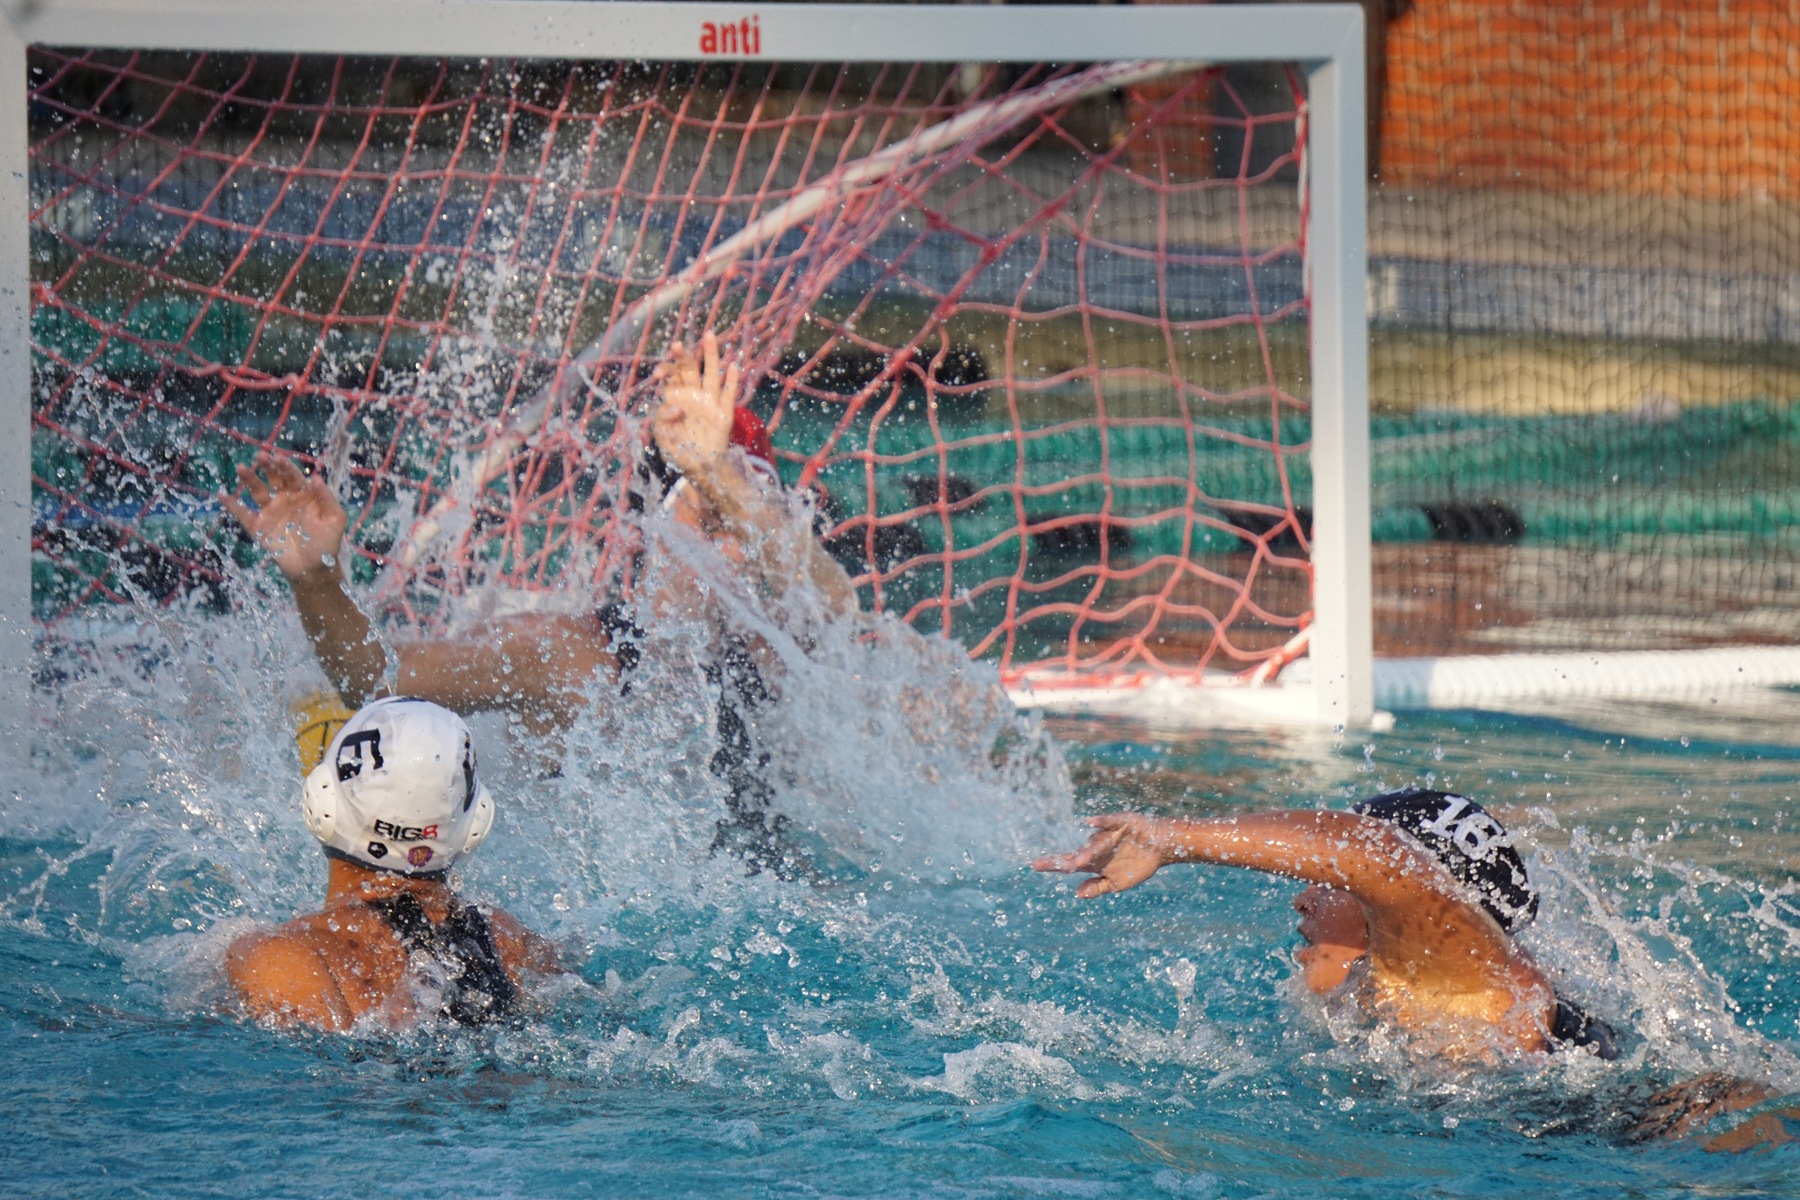 Tough competition in Santa Barbara for Women's Water Polo, Vikes finish weekend 1-4